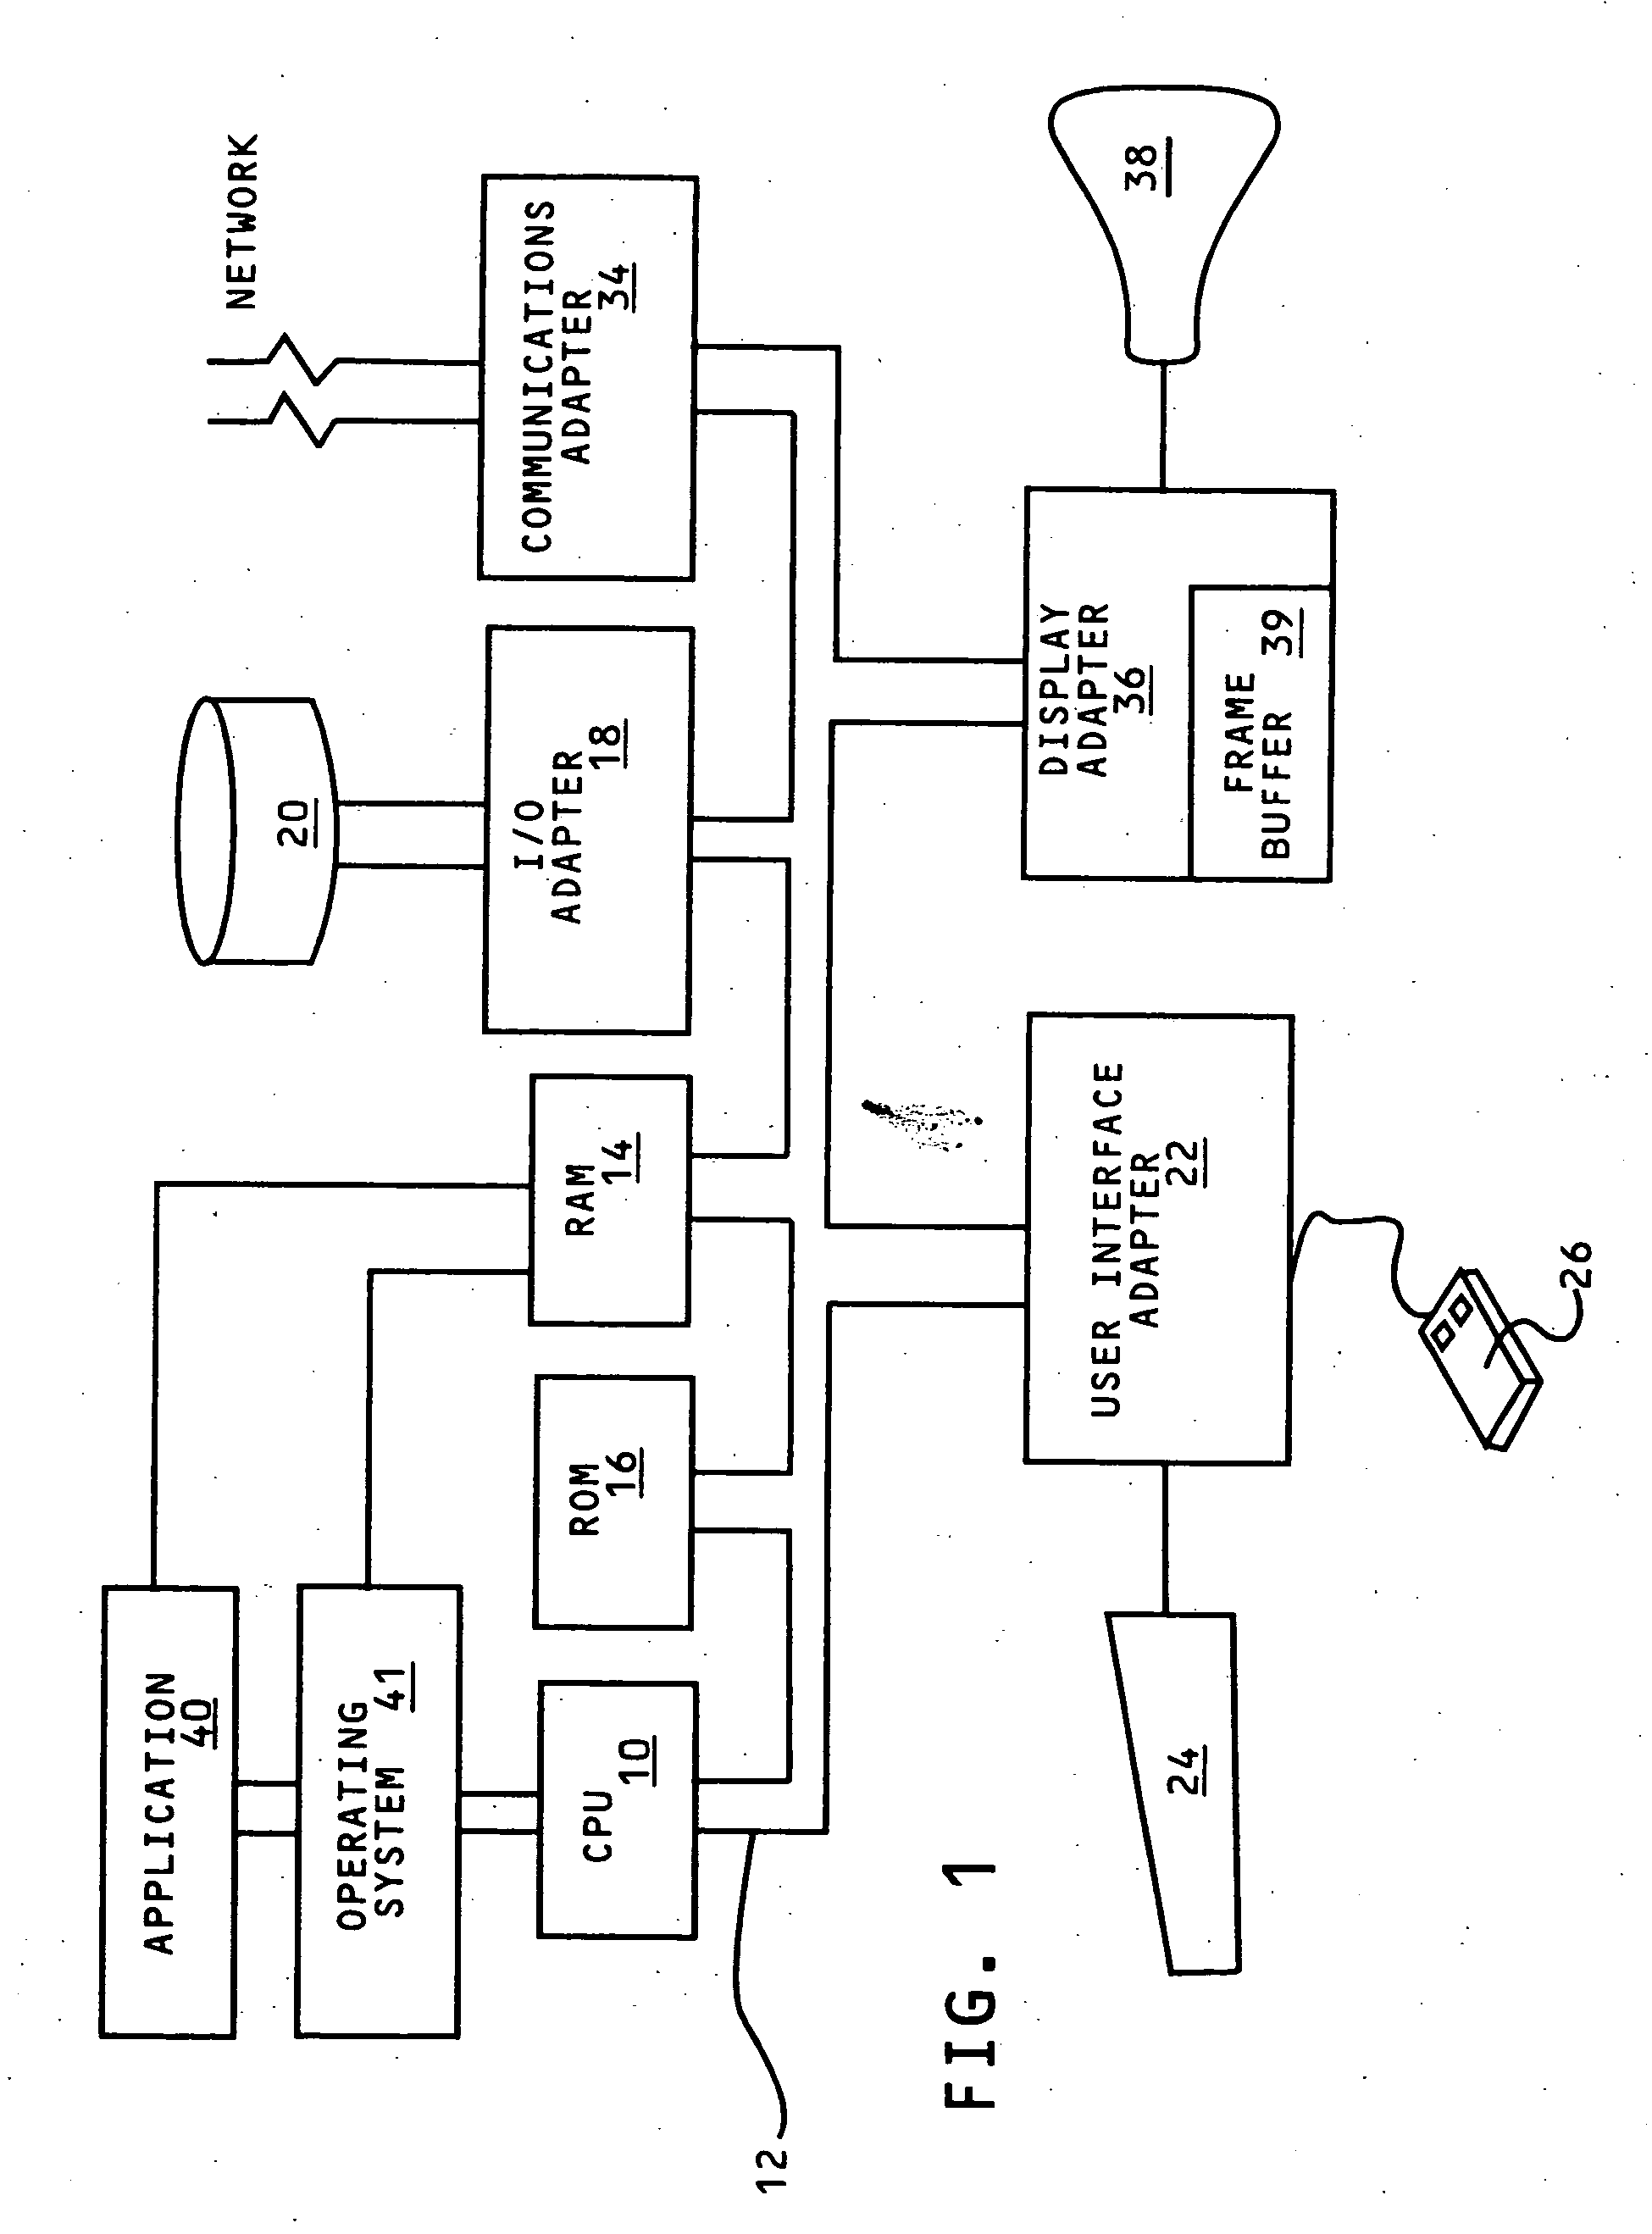 System for creating markup language documents at a receiving display station having multiple contexts from multiple secured sources on a communication network, e.g. the web with visual indicators for identifying content and security